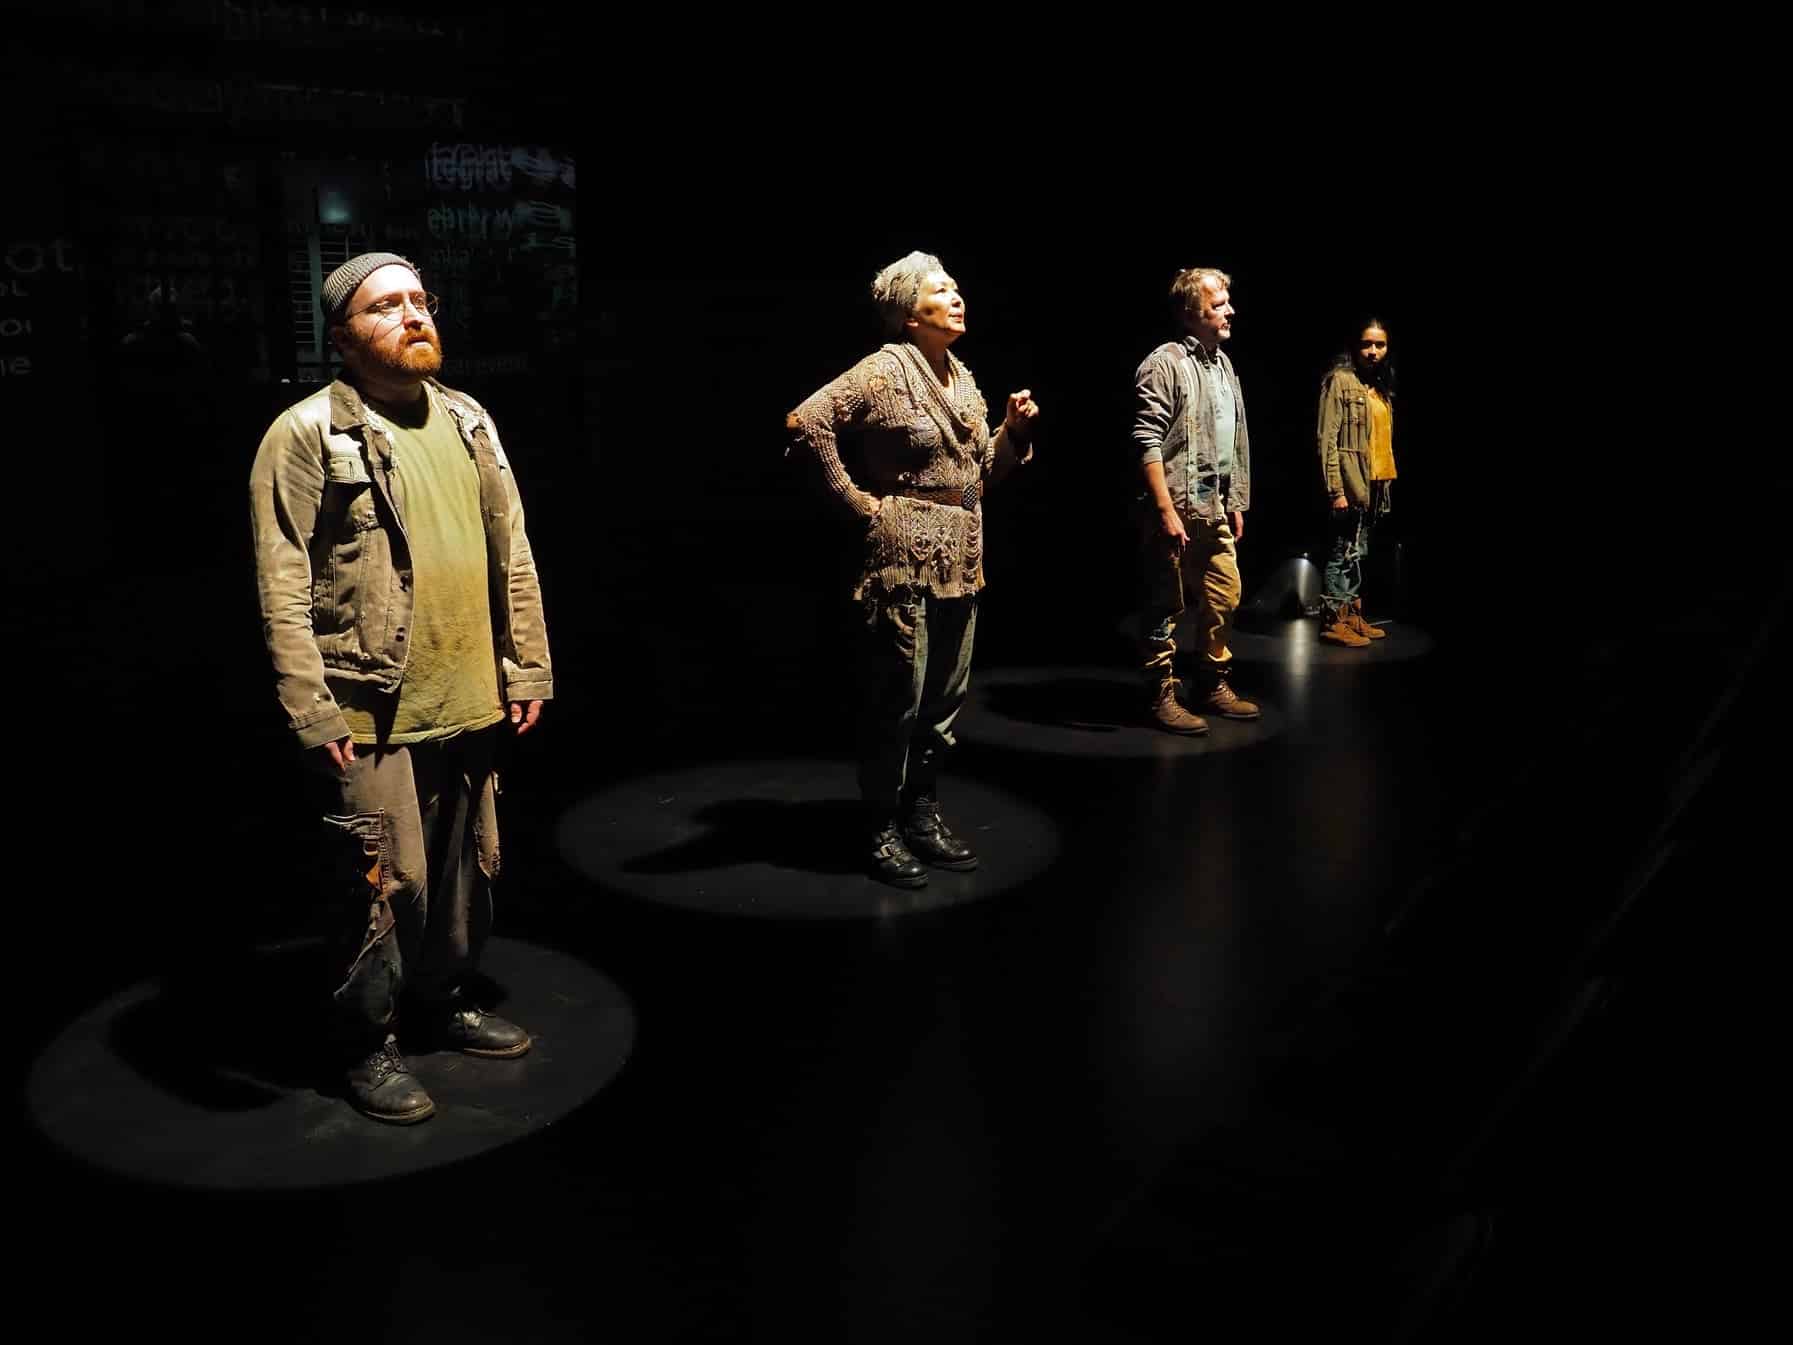 A group of people stand facing forward on a dark stage.